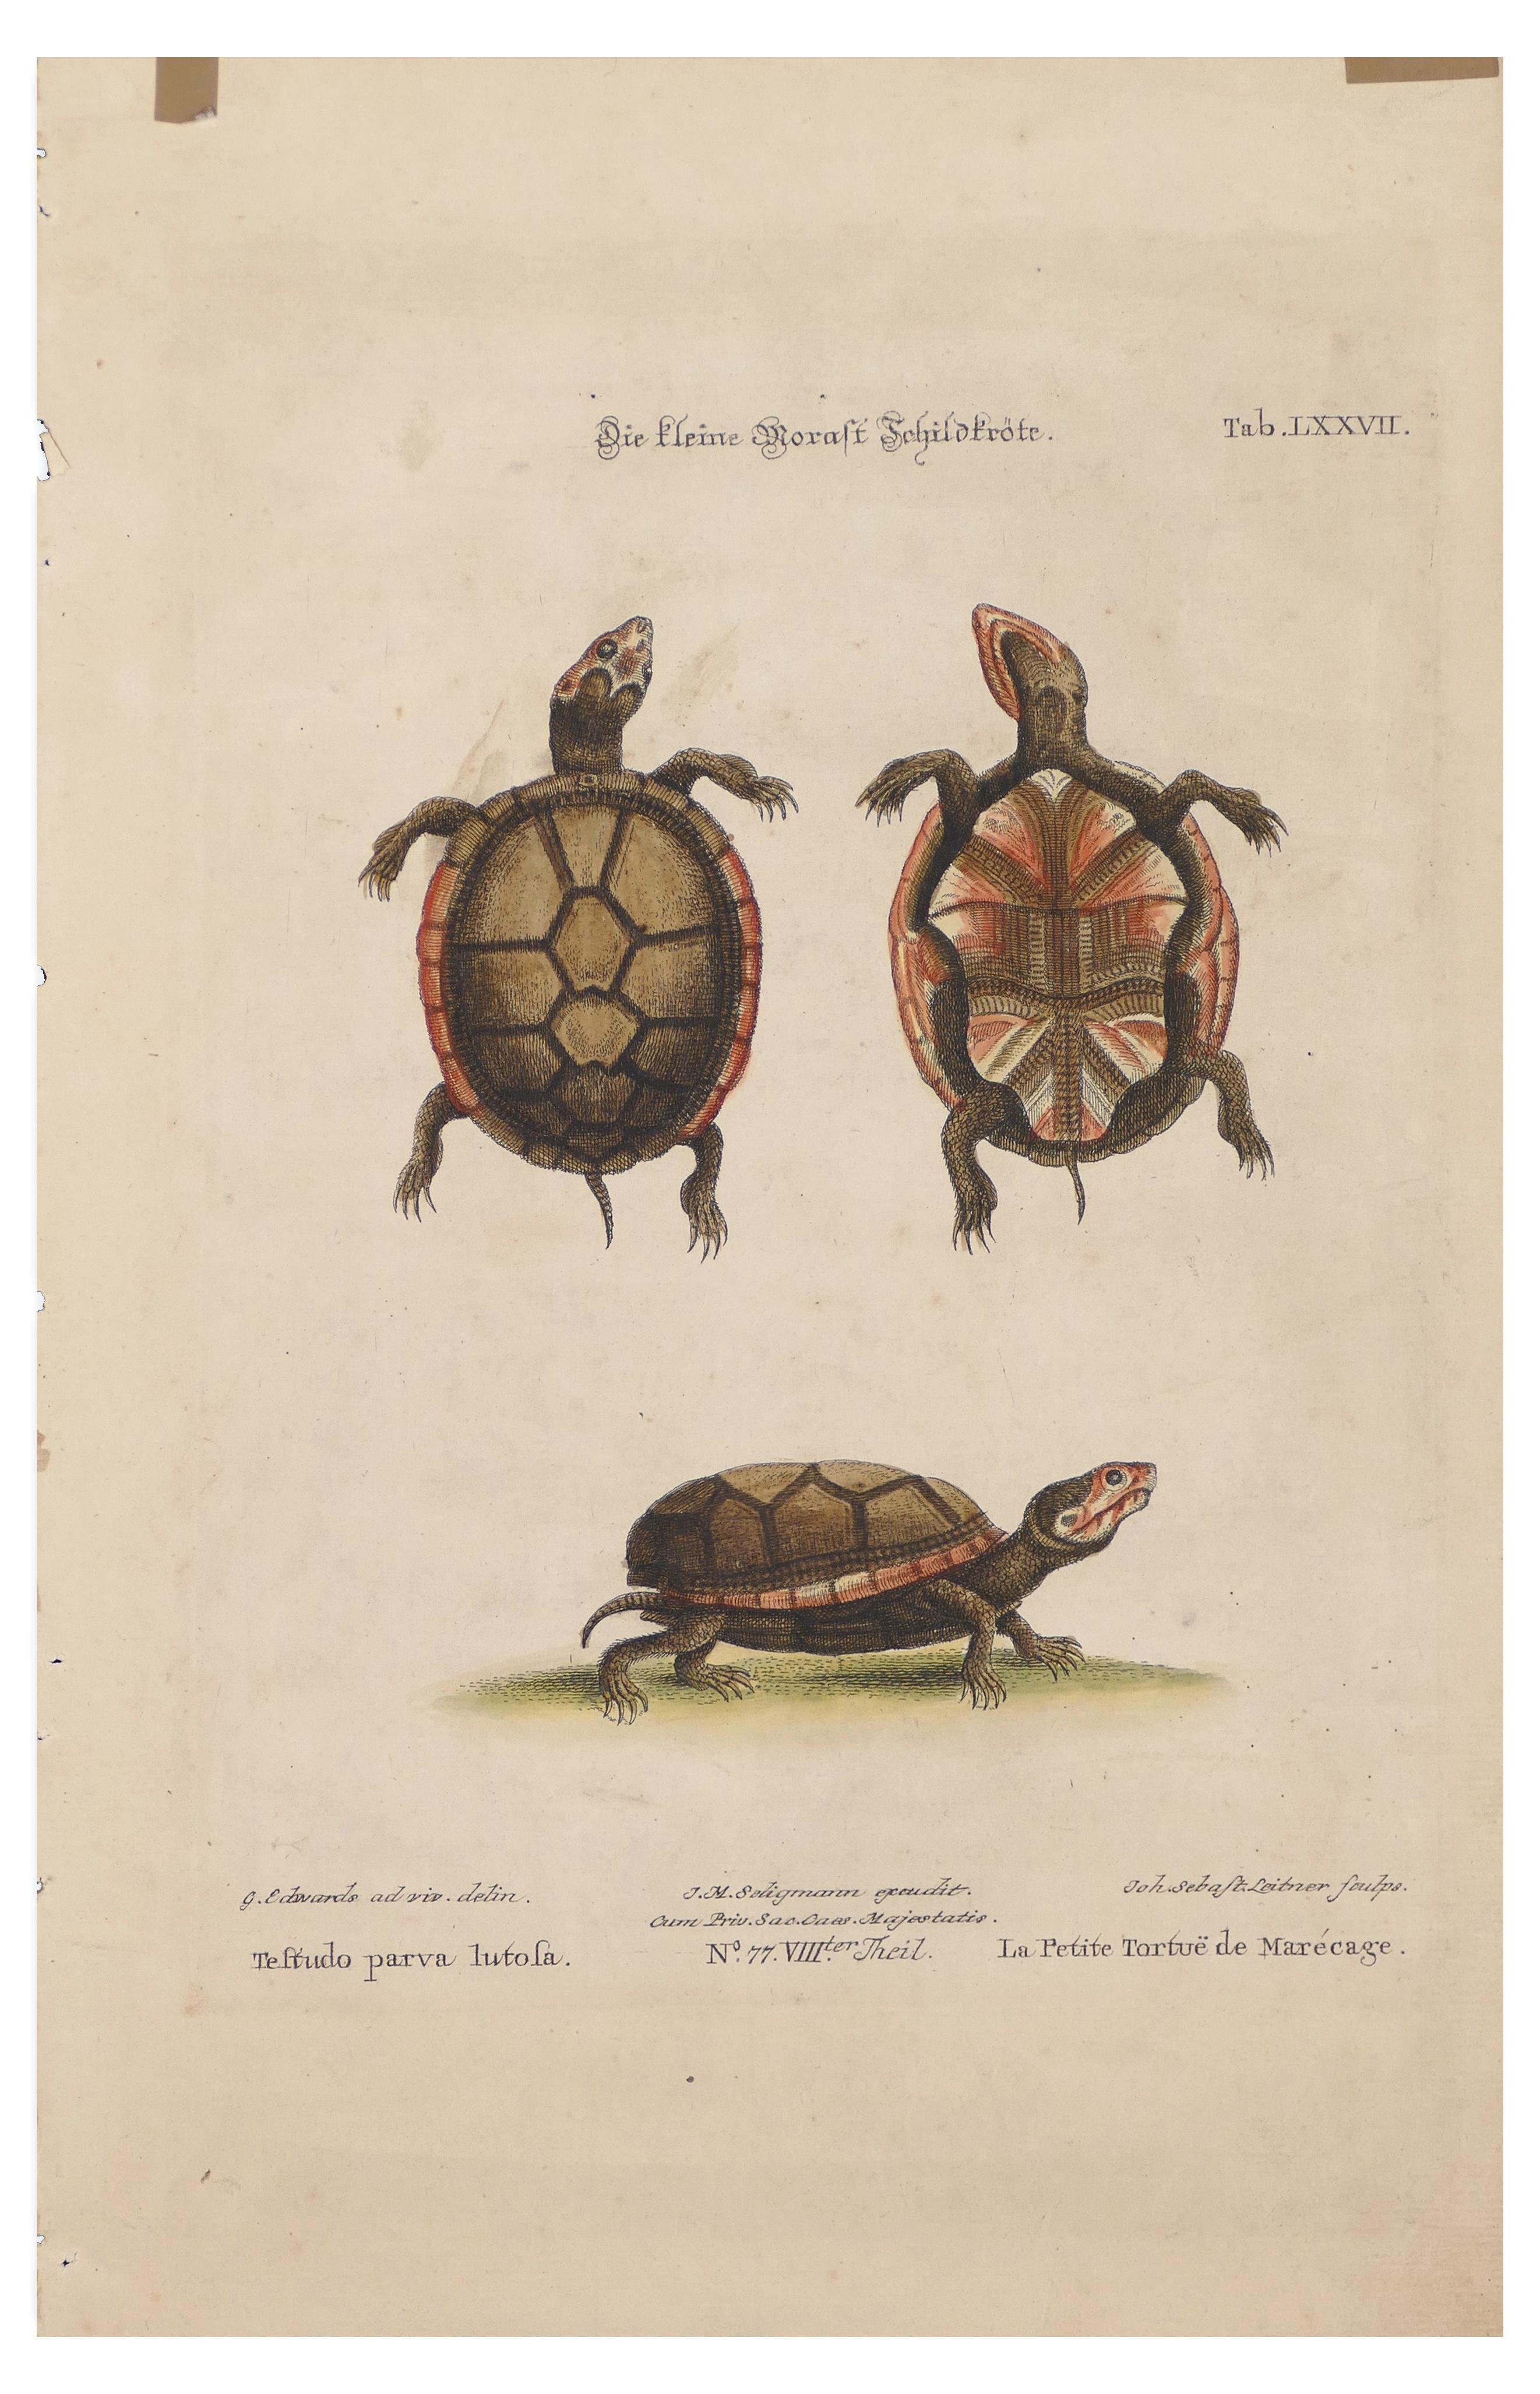 Turtles is an original print realized by George Edwards in the 18th century.

Color lithograph.

Original Title: Die kleine Moraft Tchildgröte, Tab. LXXVII. 

Good conditions, except for minor stains with scotches stuck on top, a little torn on the